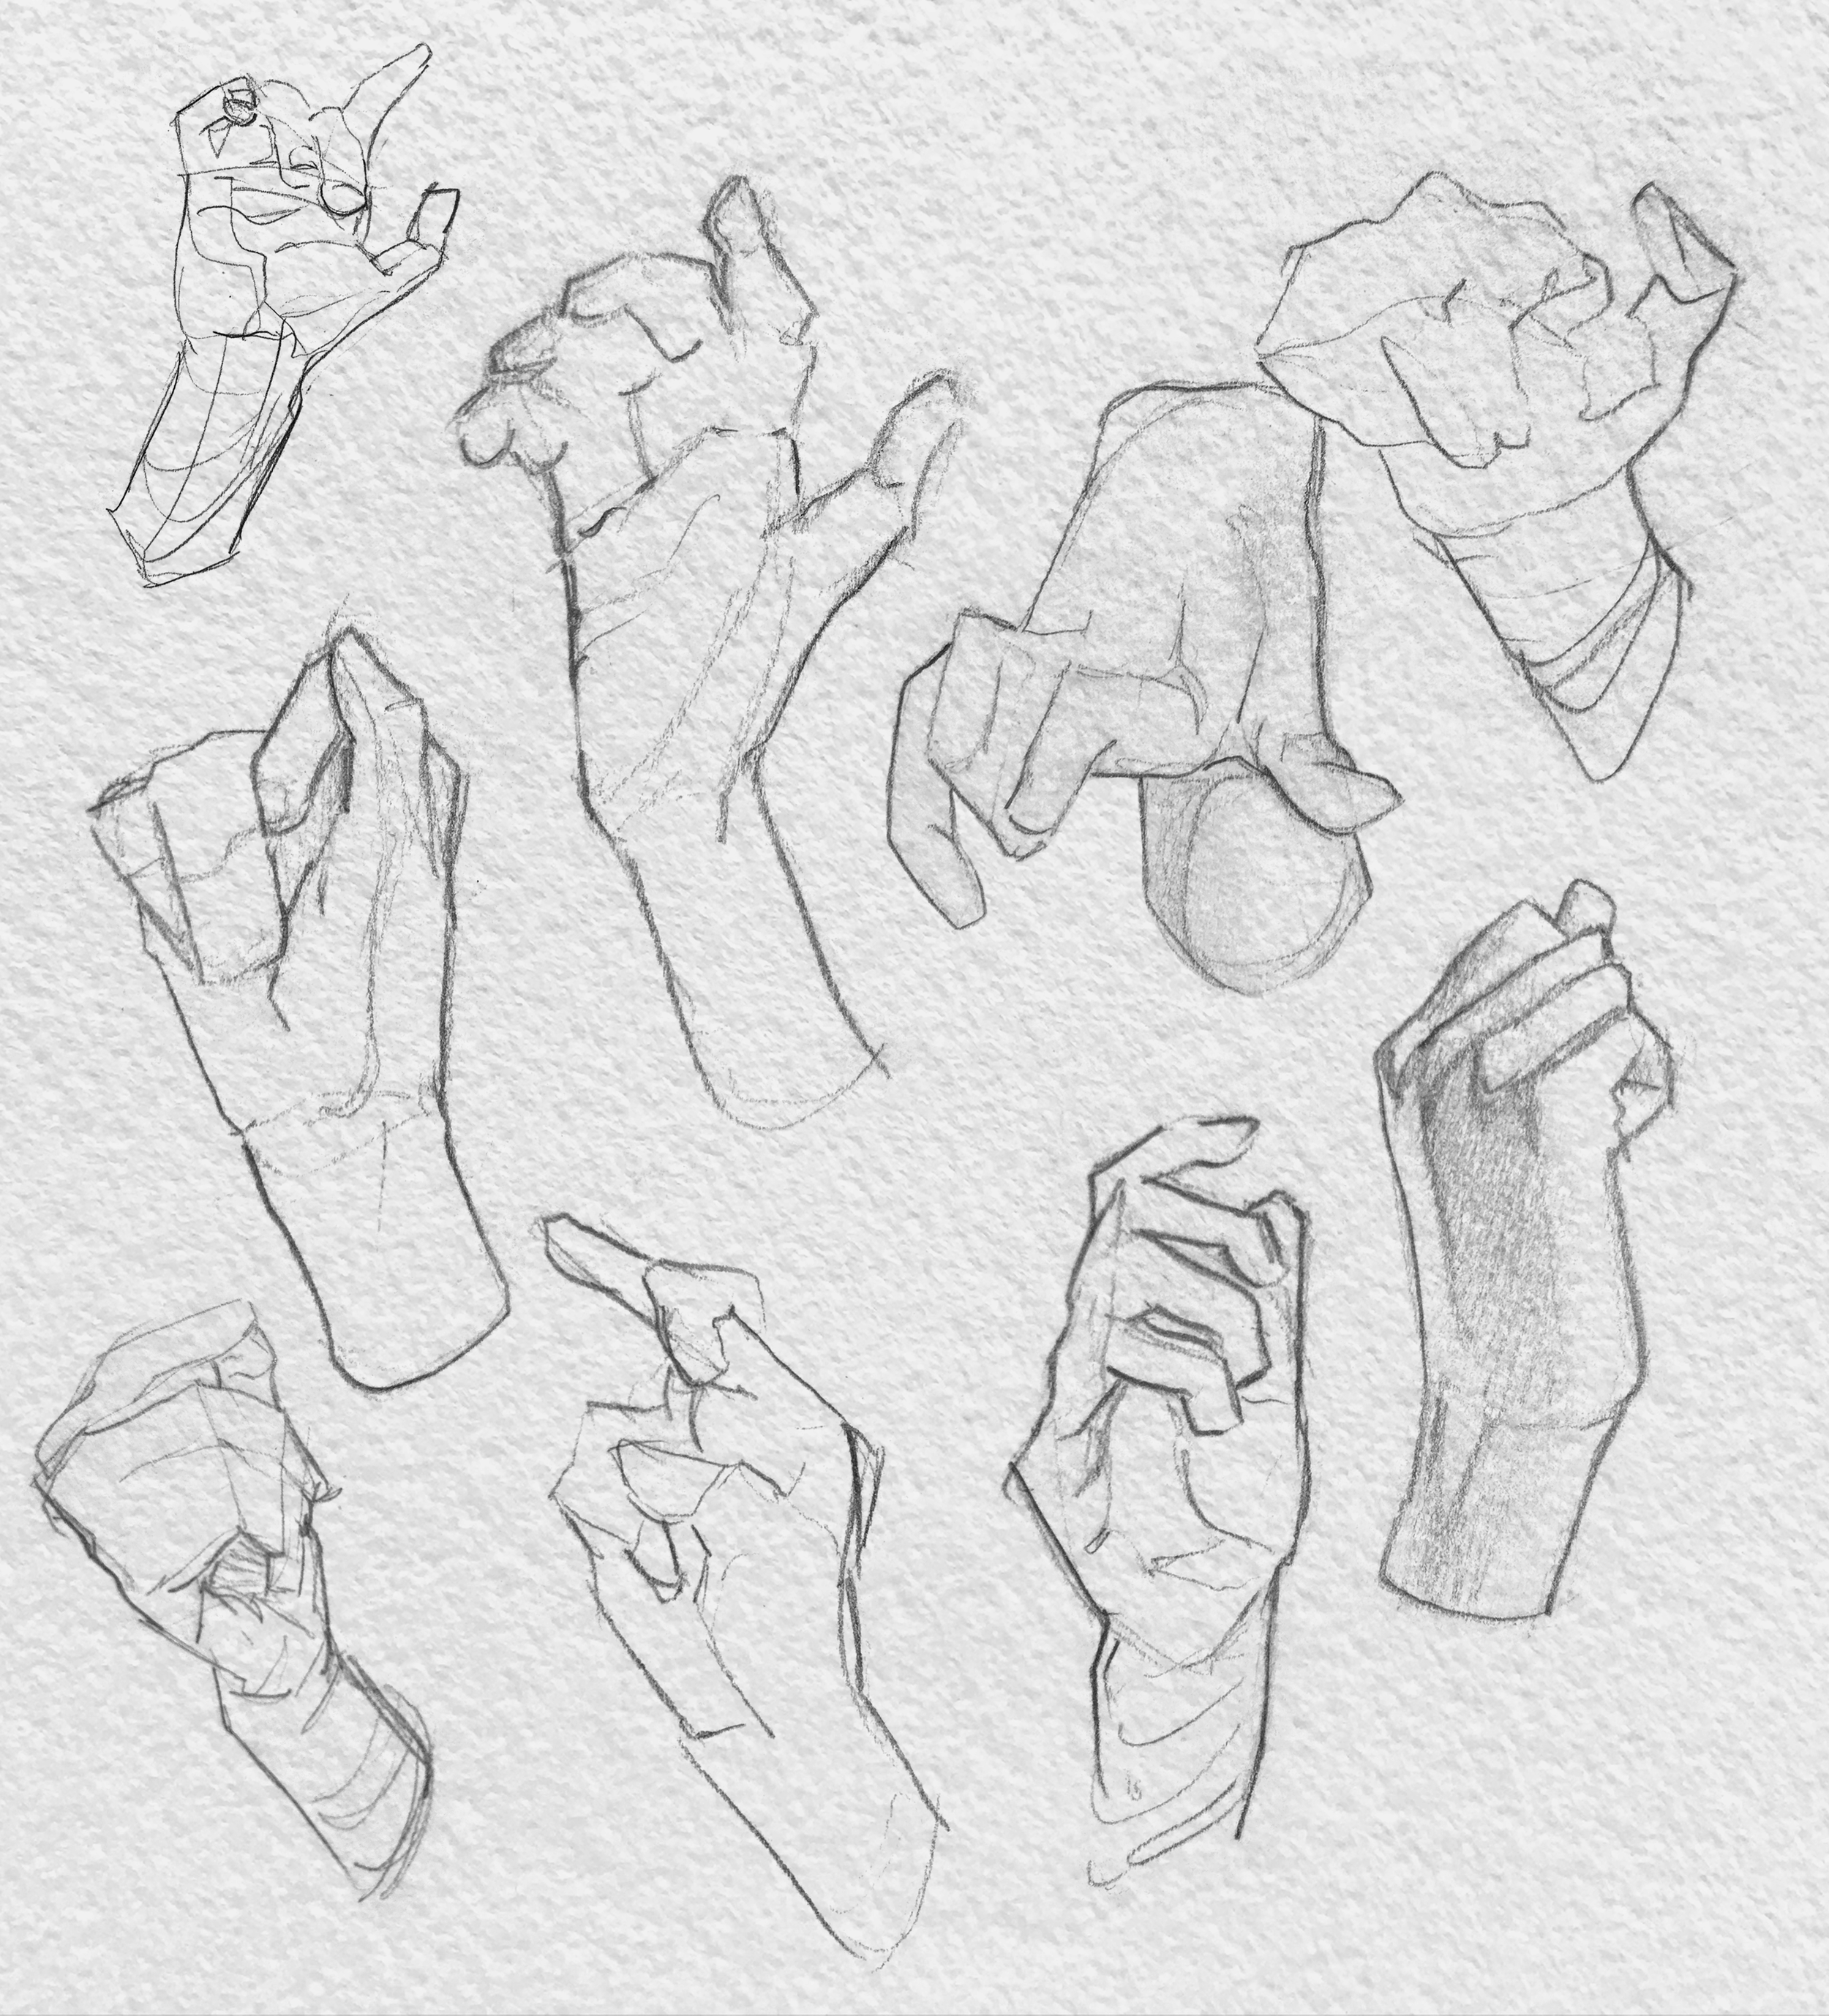 sketch of hands in different poses